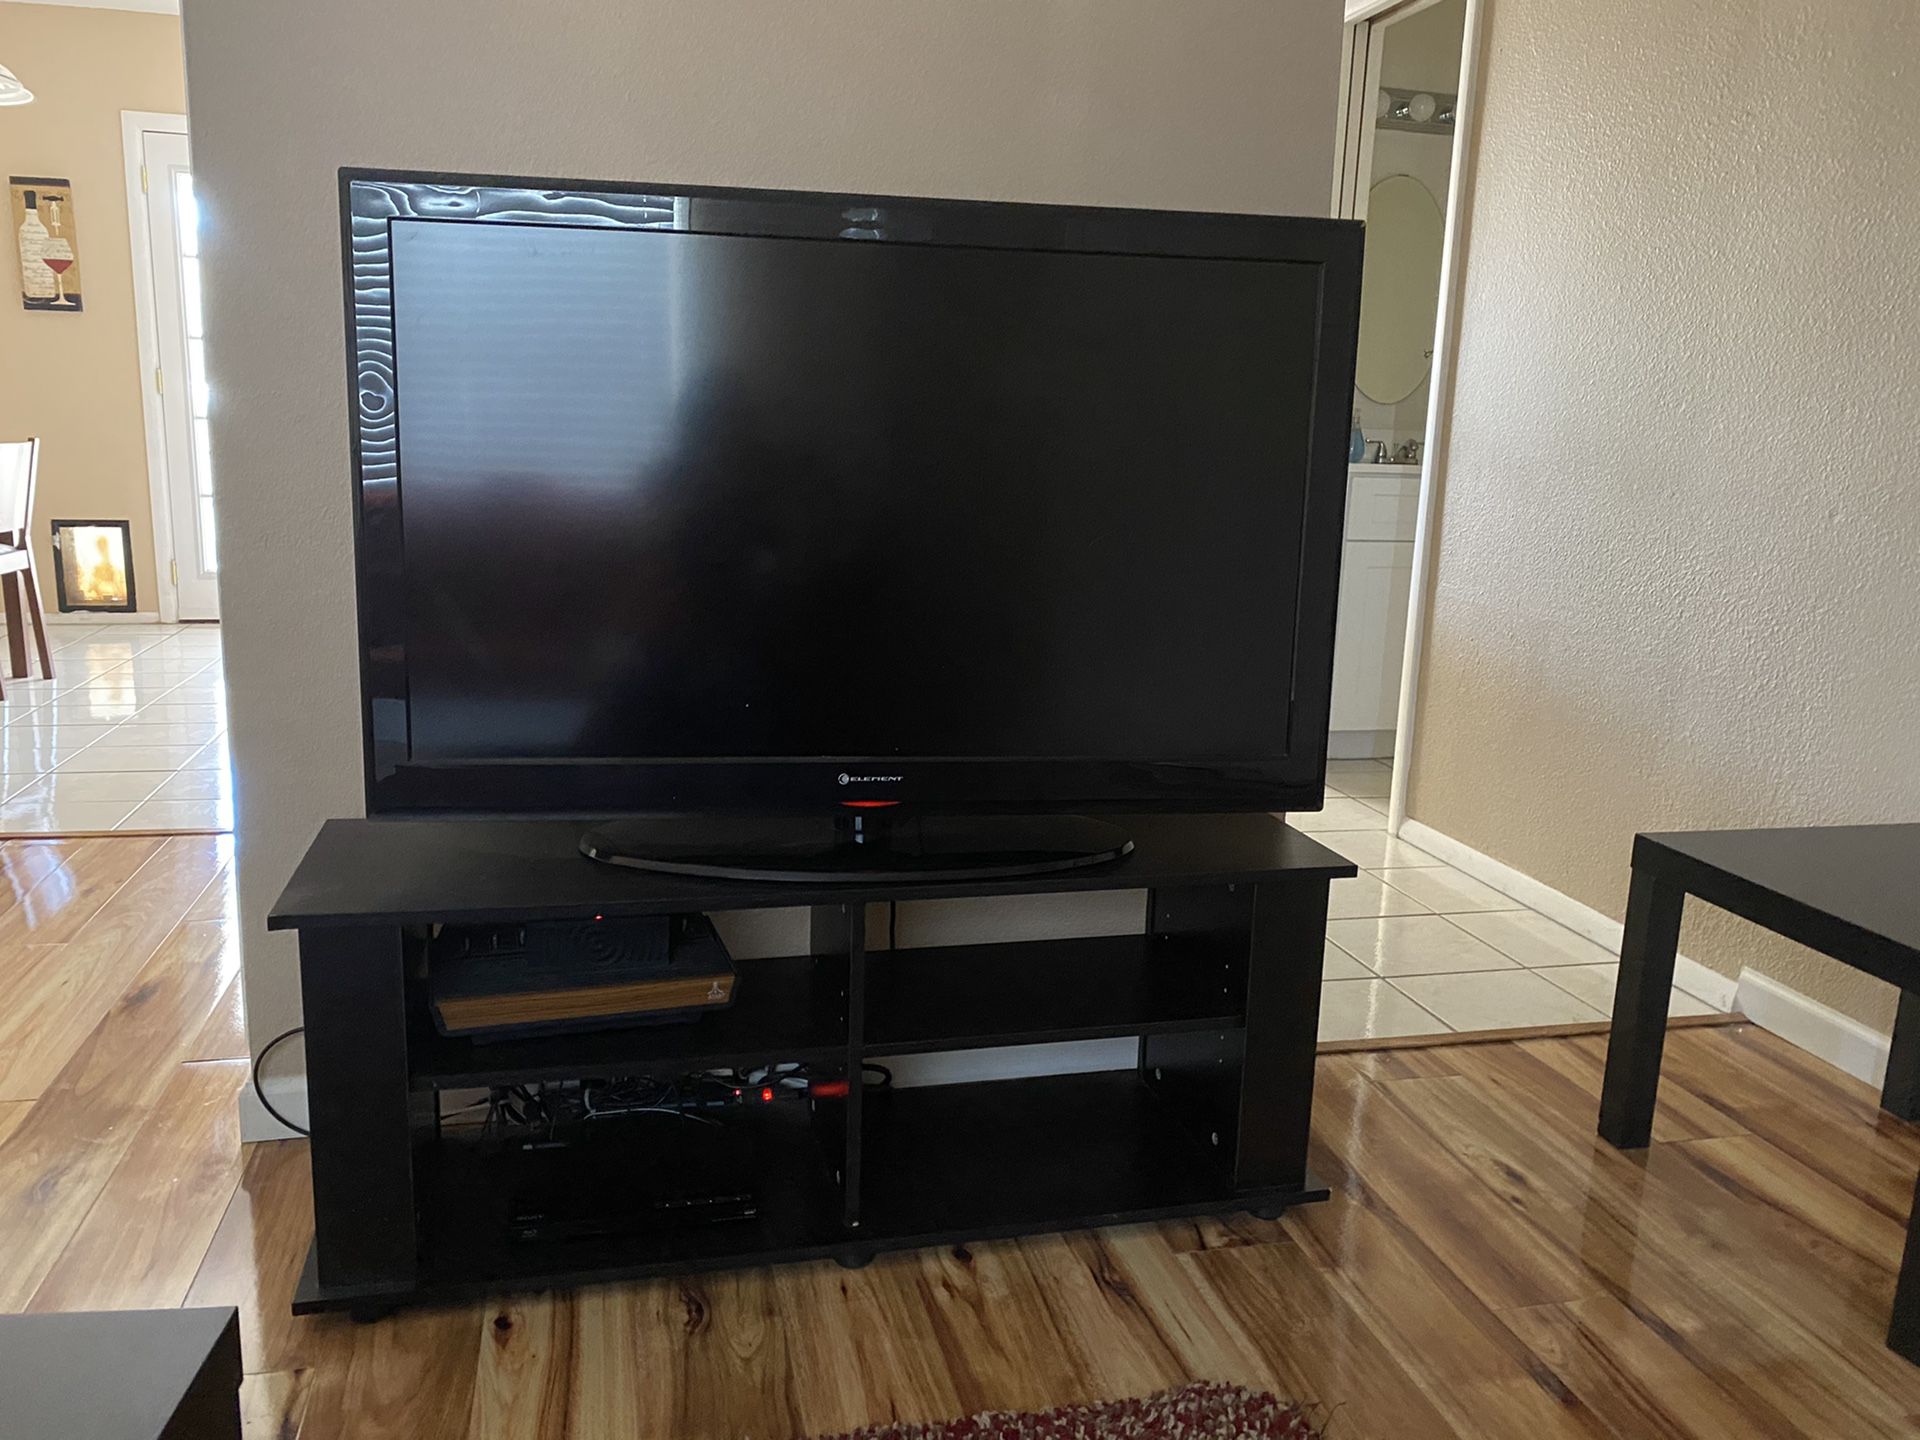 Used LCD TV and TV stand